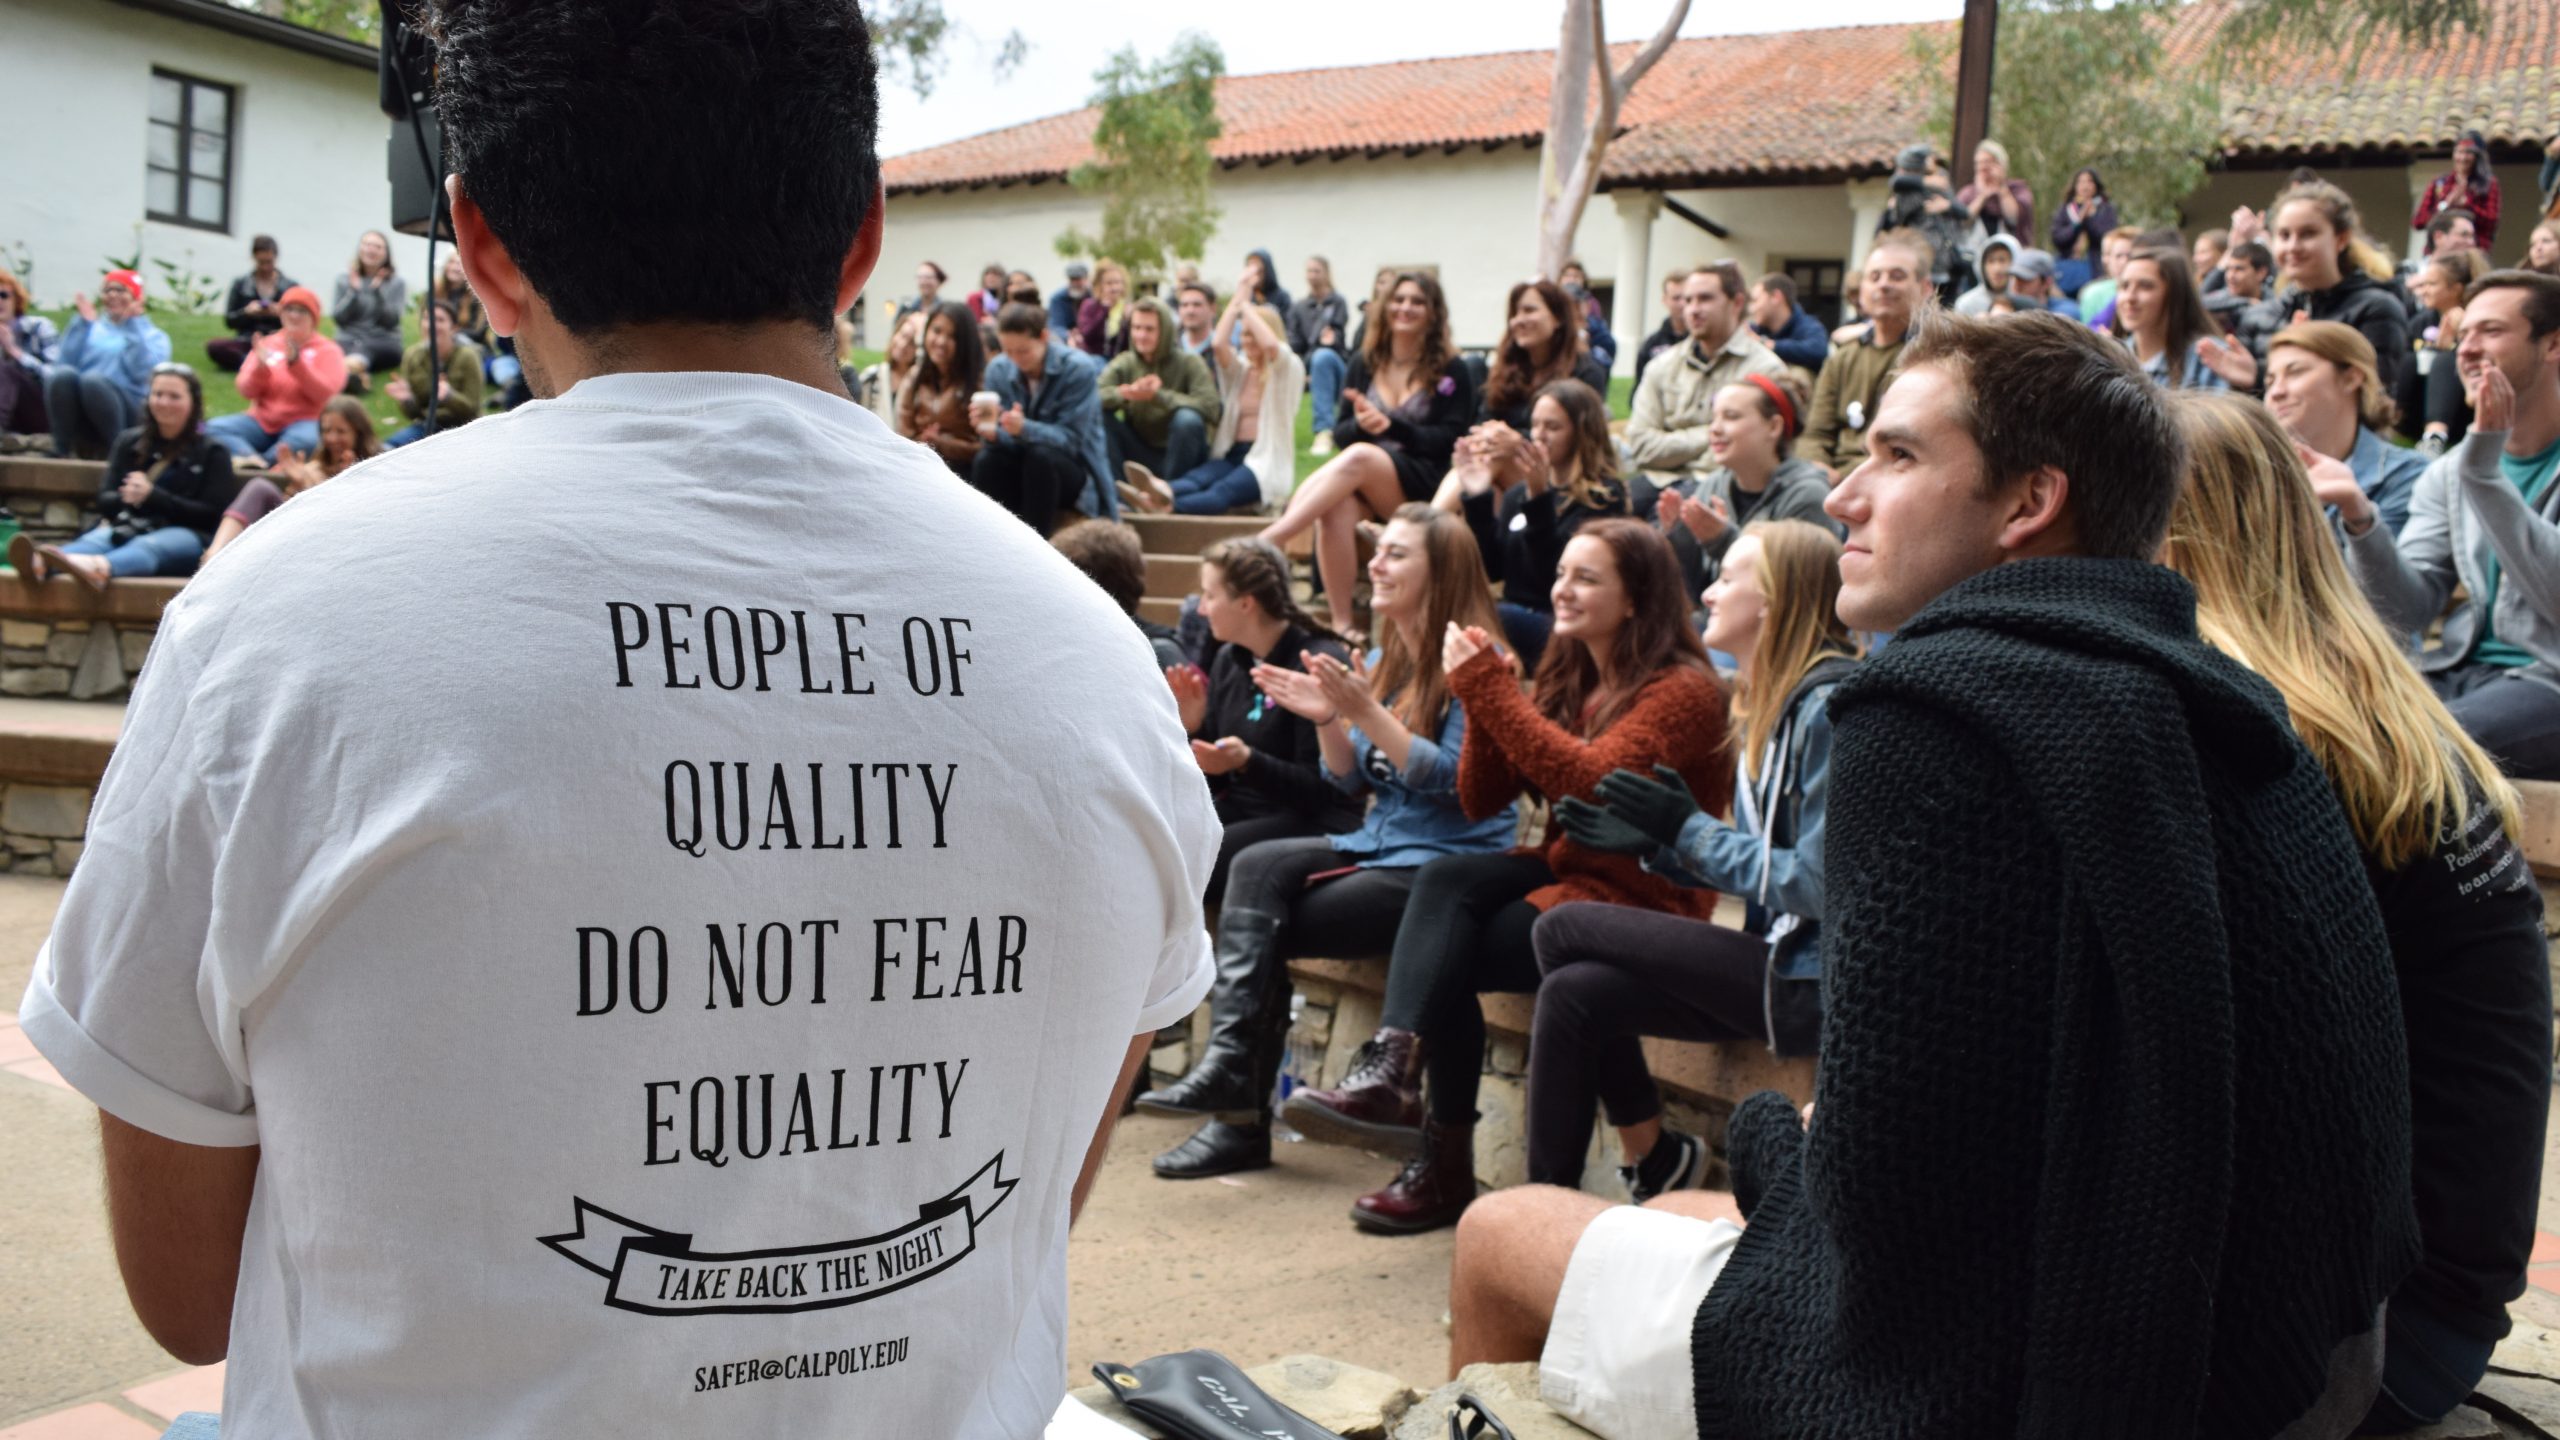 A large group of students applaud a speaker at San Luis Obispo's Mission Plaza. A young man in the foreground wears a shirt reading "People of quality do not fear equality"